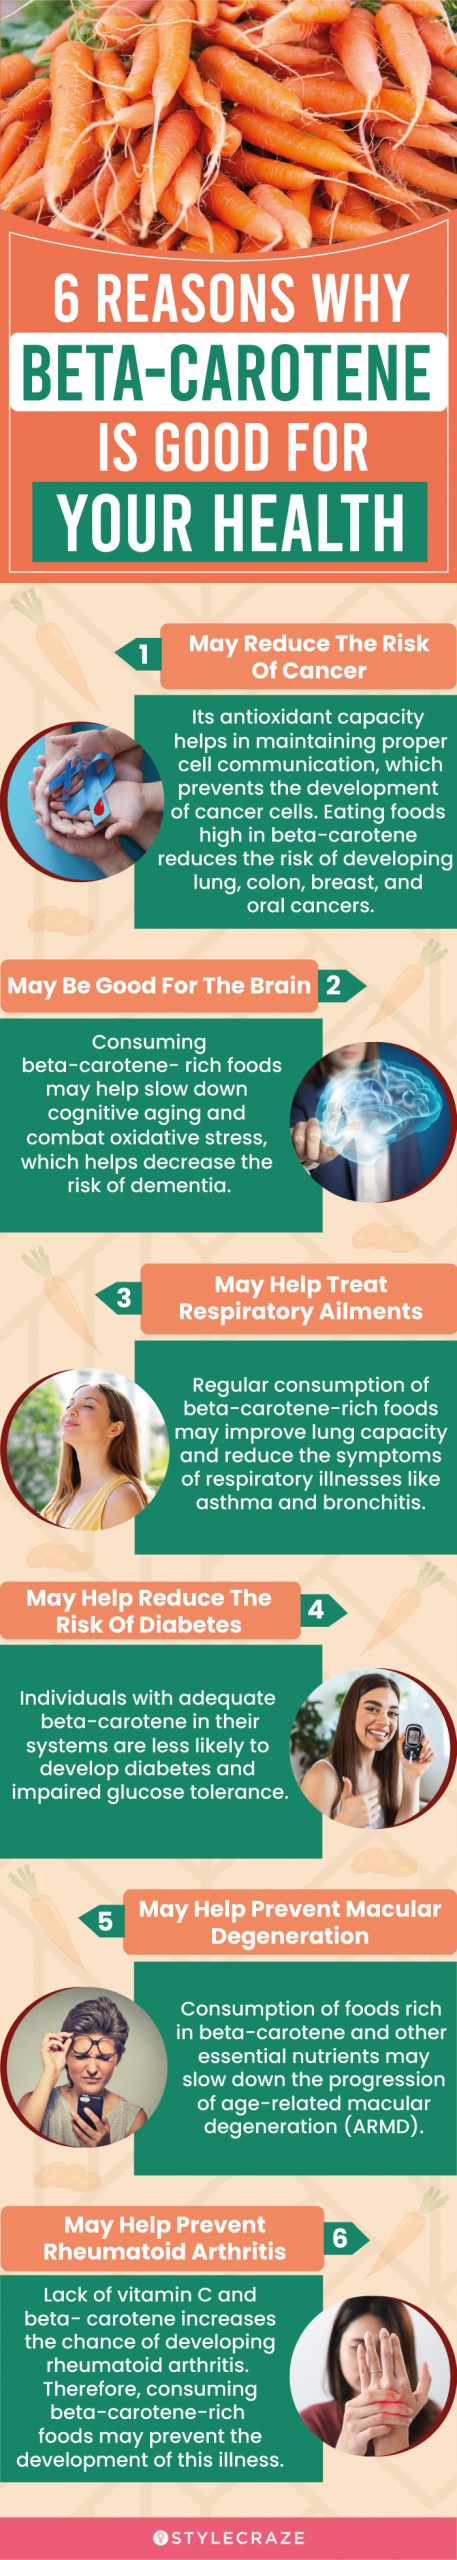 6 reasons why beta carotene is good for your health (infographic)